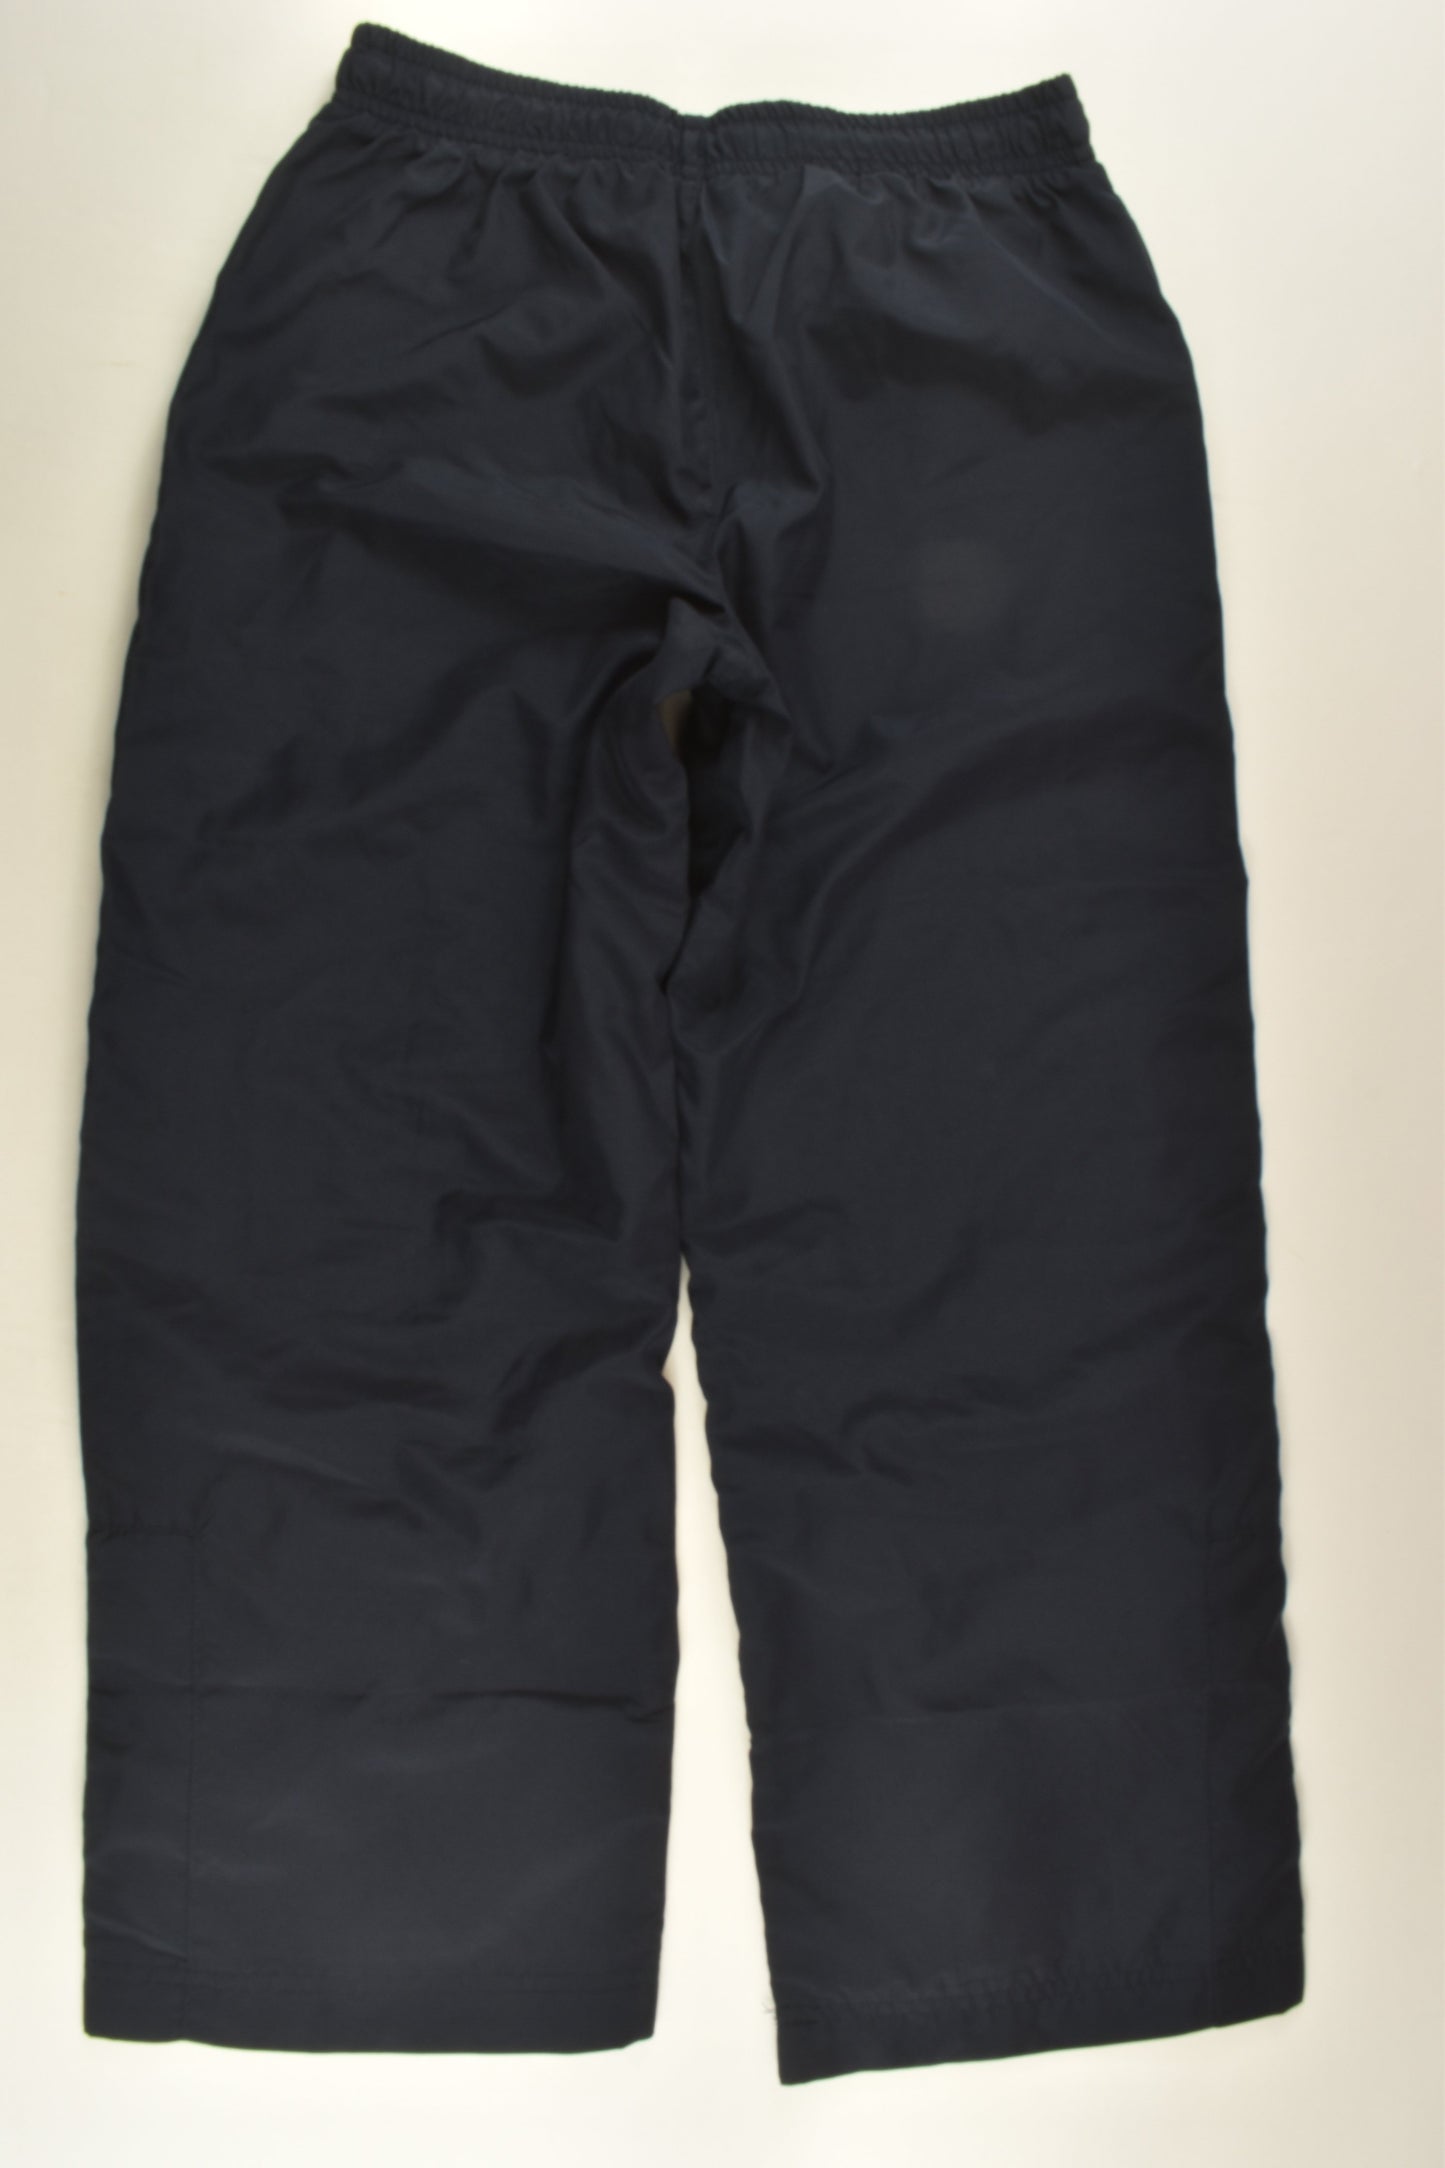 Adidas Size 8 Outdoor Pants